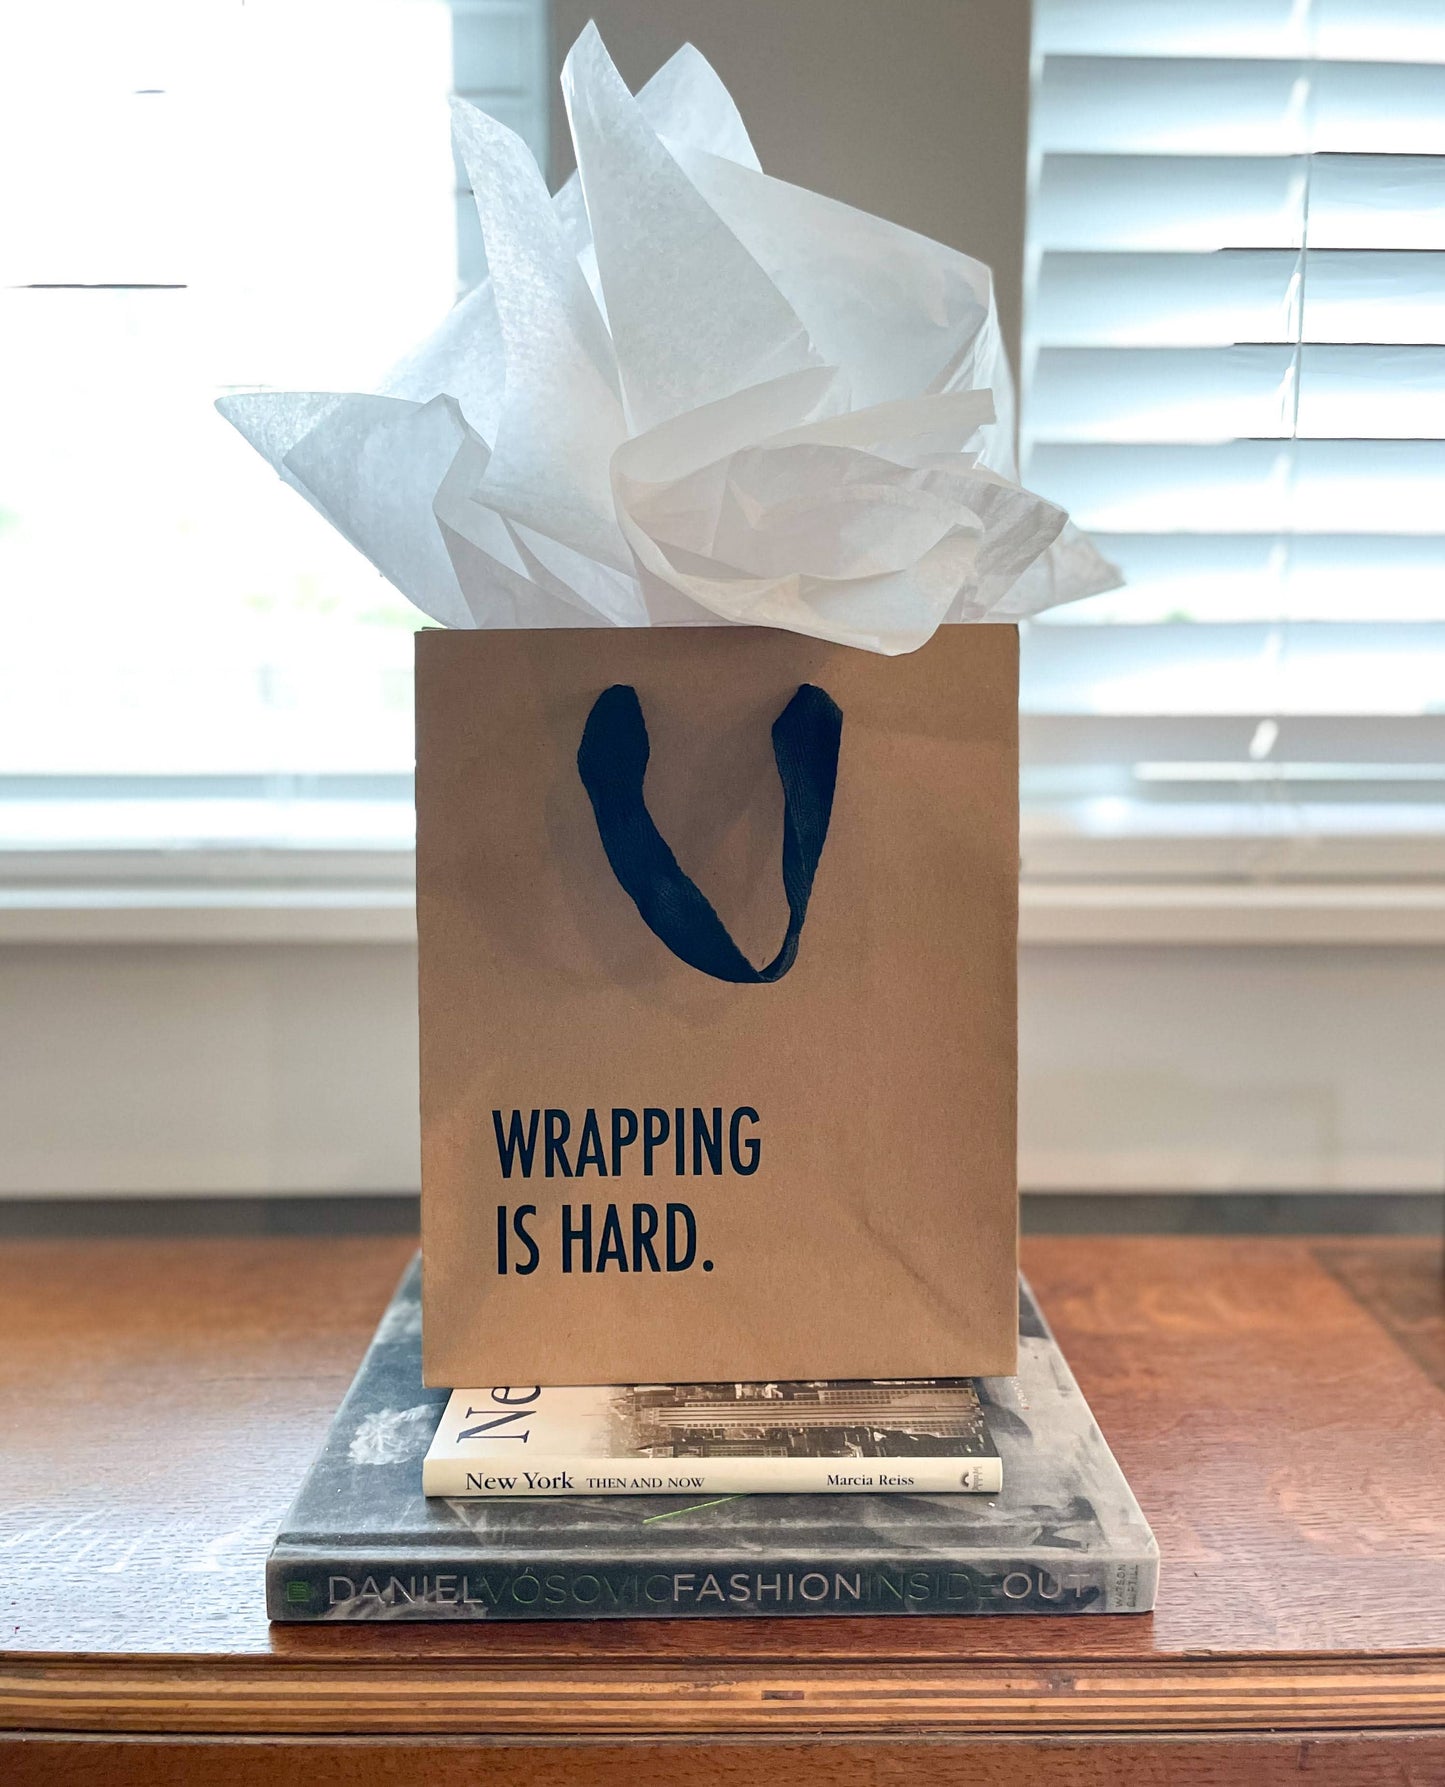 Wrapping is Hard Gift Bag